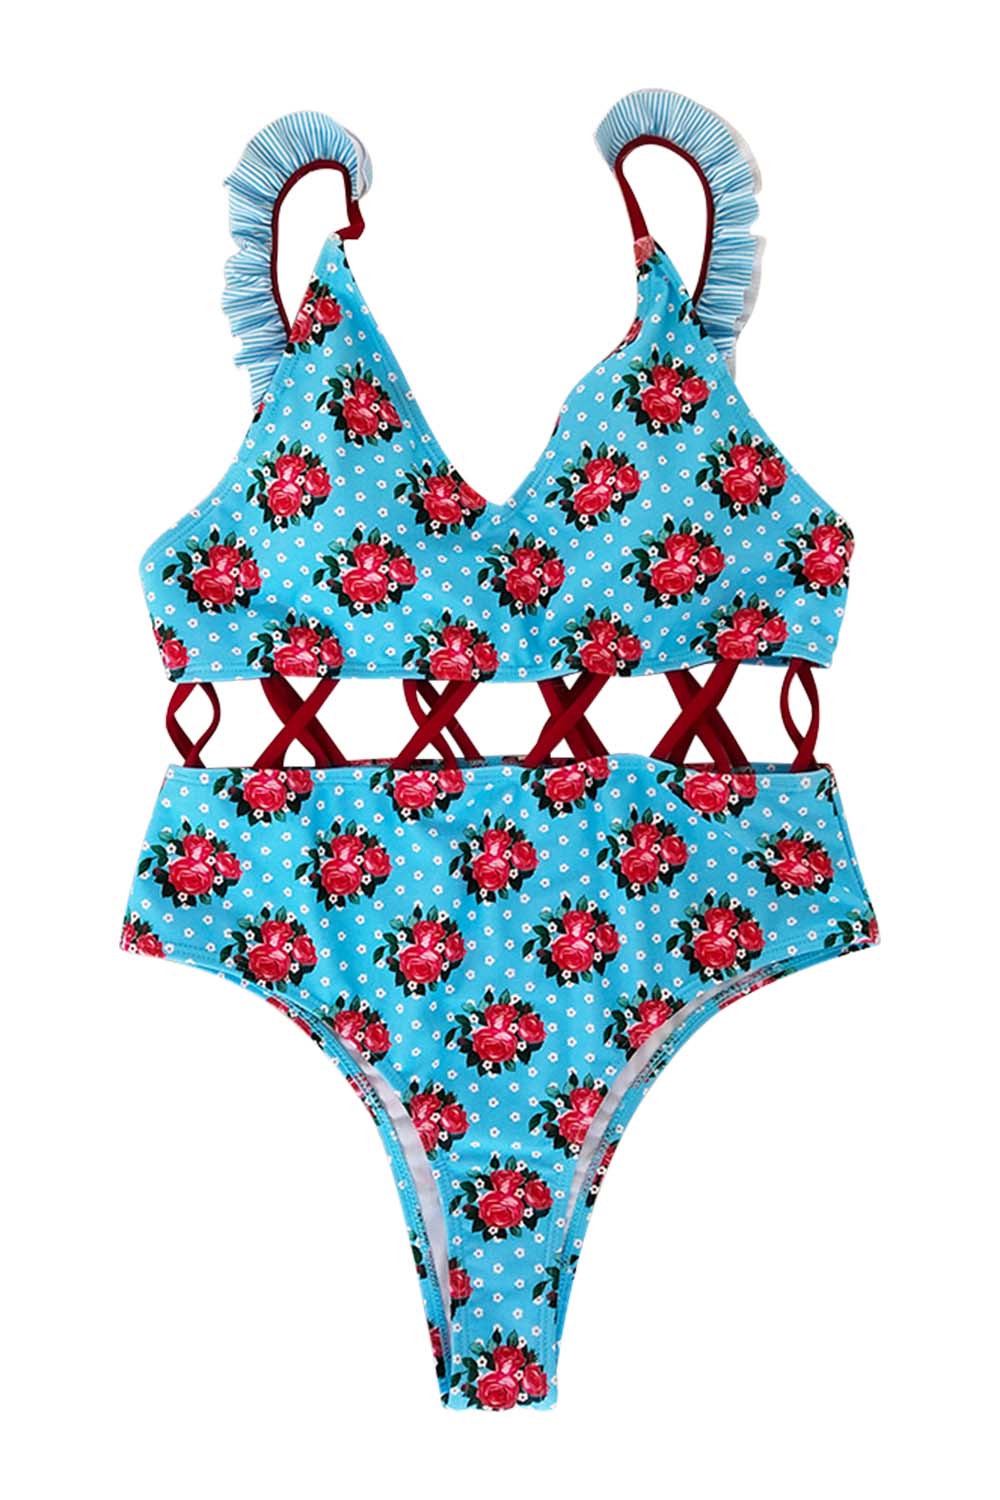 Iyasson Floral Criss Cross One-piece Swimsuit